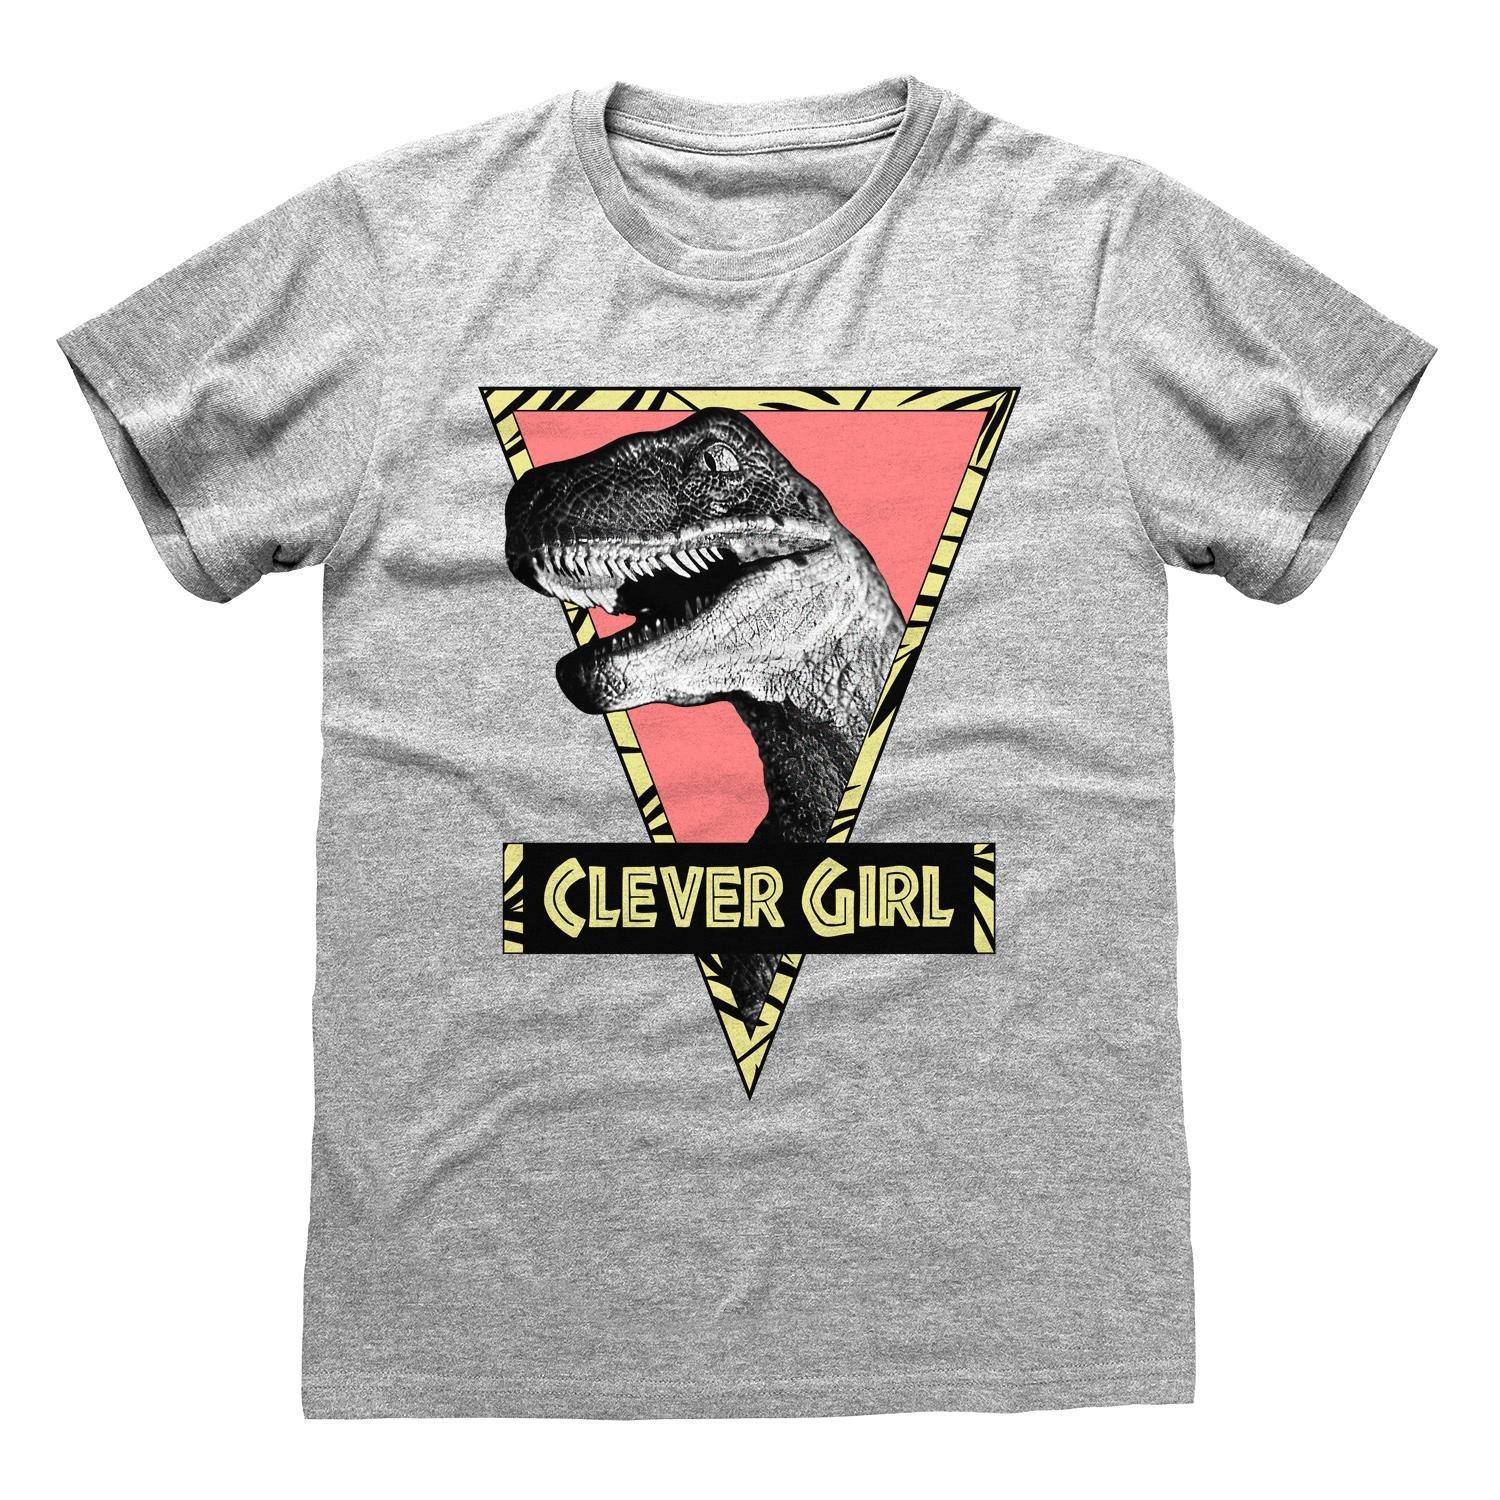 Image of Jurassic Park Clever Girl TShirt - XXL